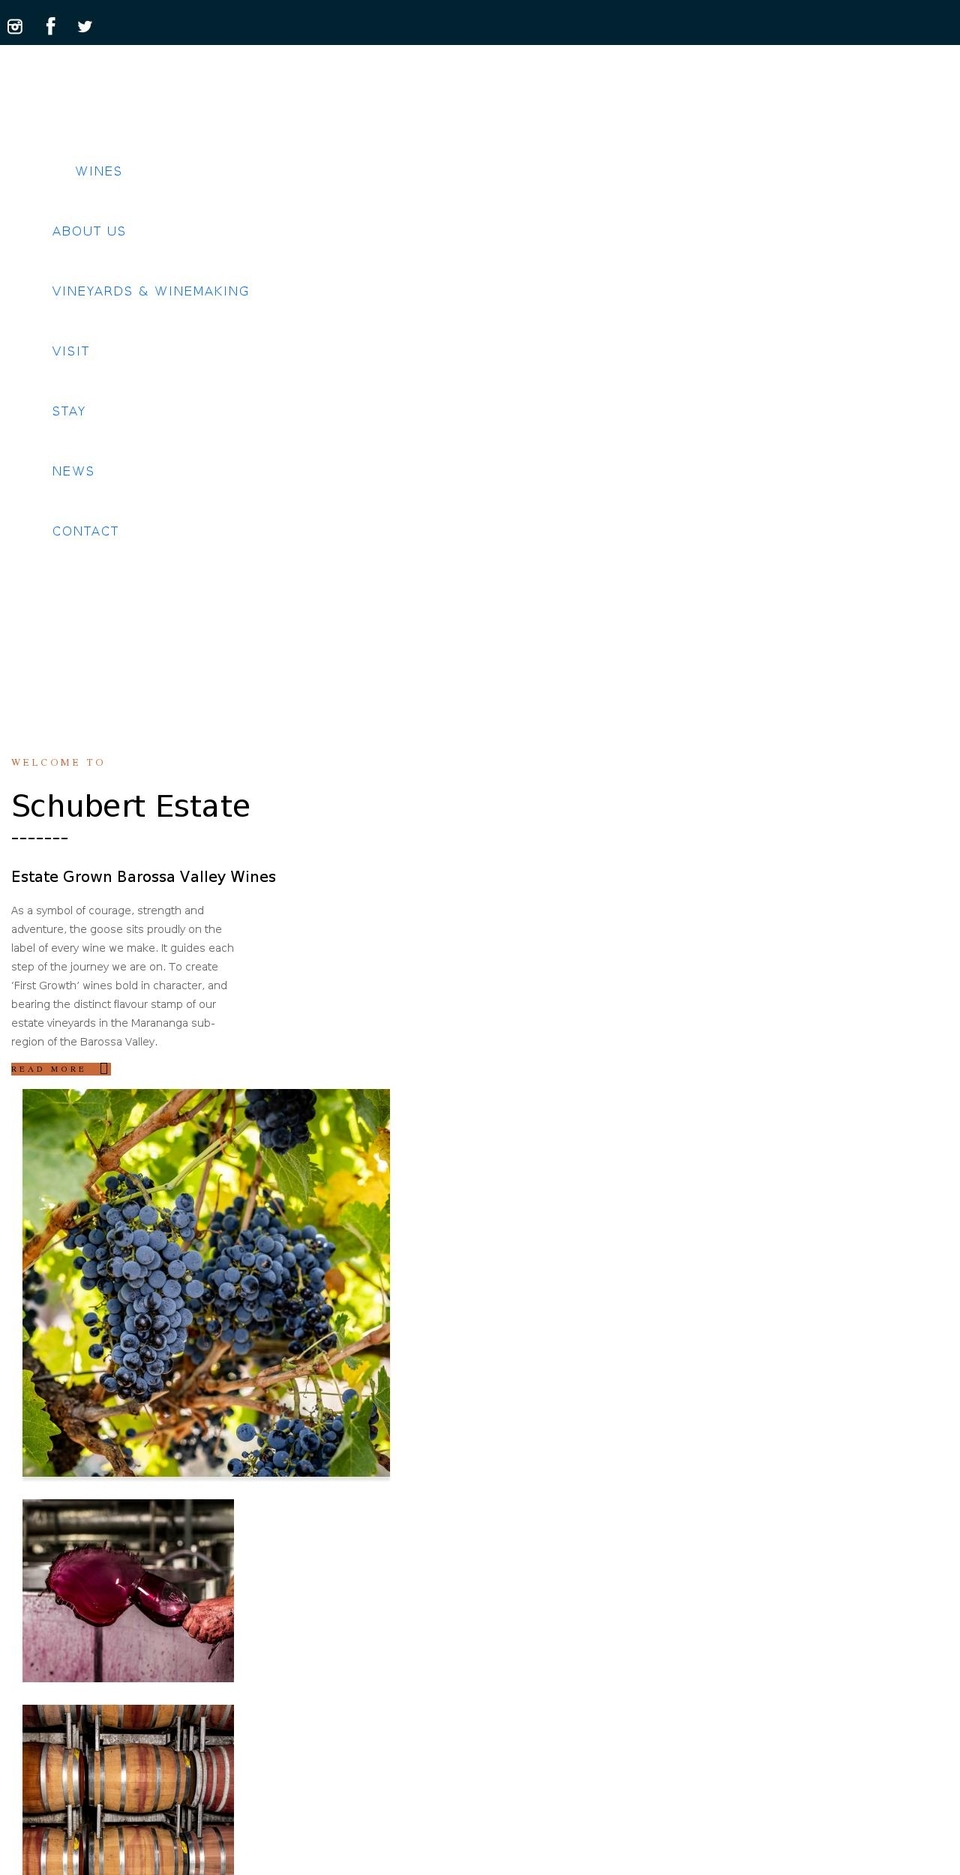 Home Shopify theme site example schubertestate.com